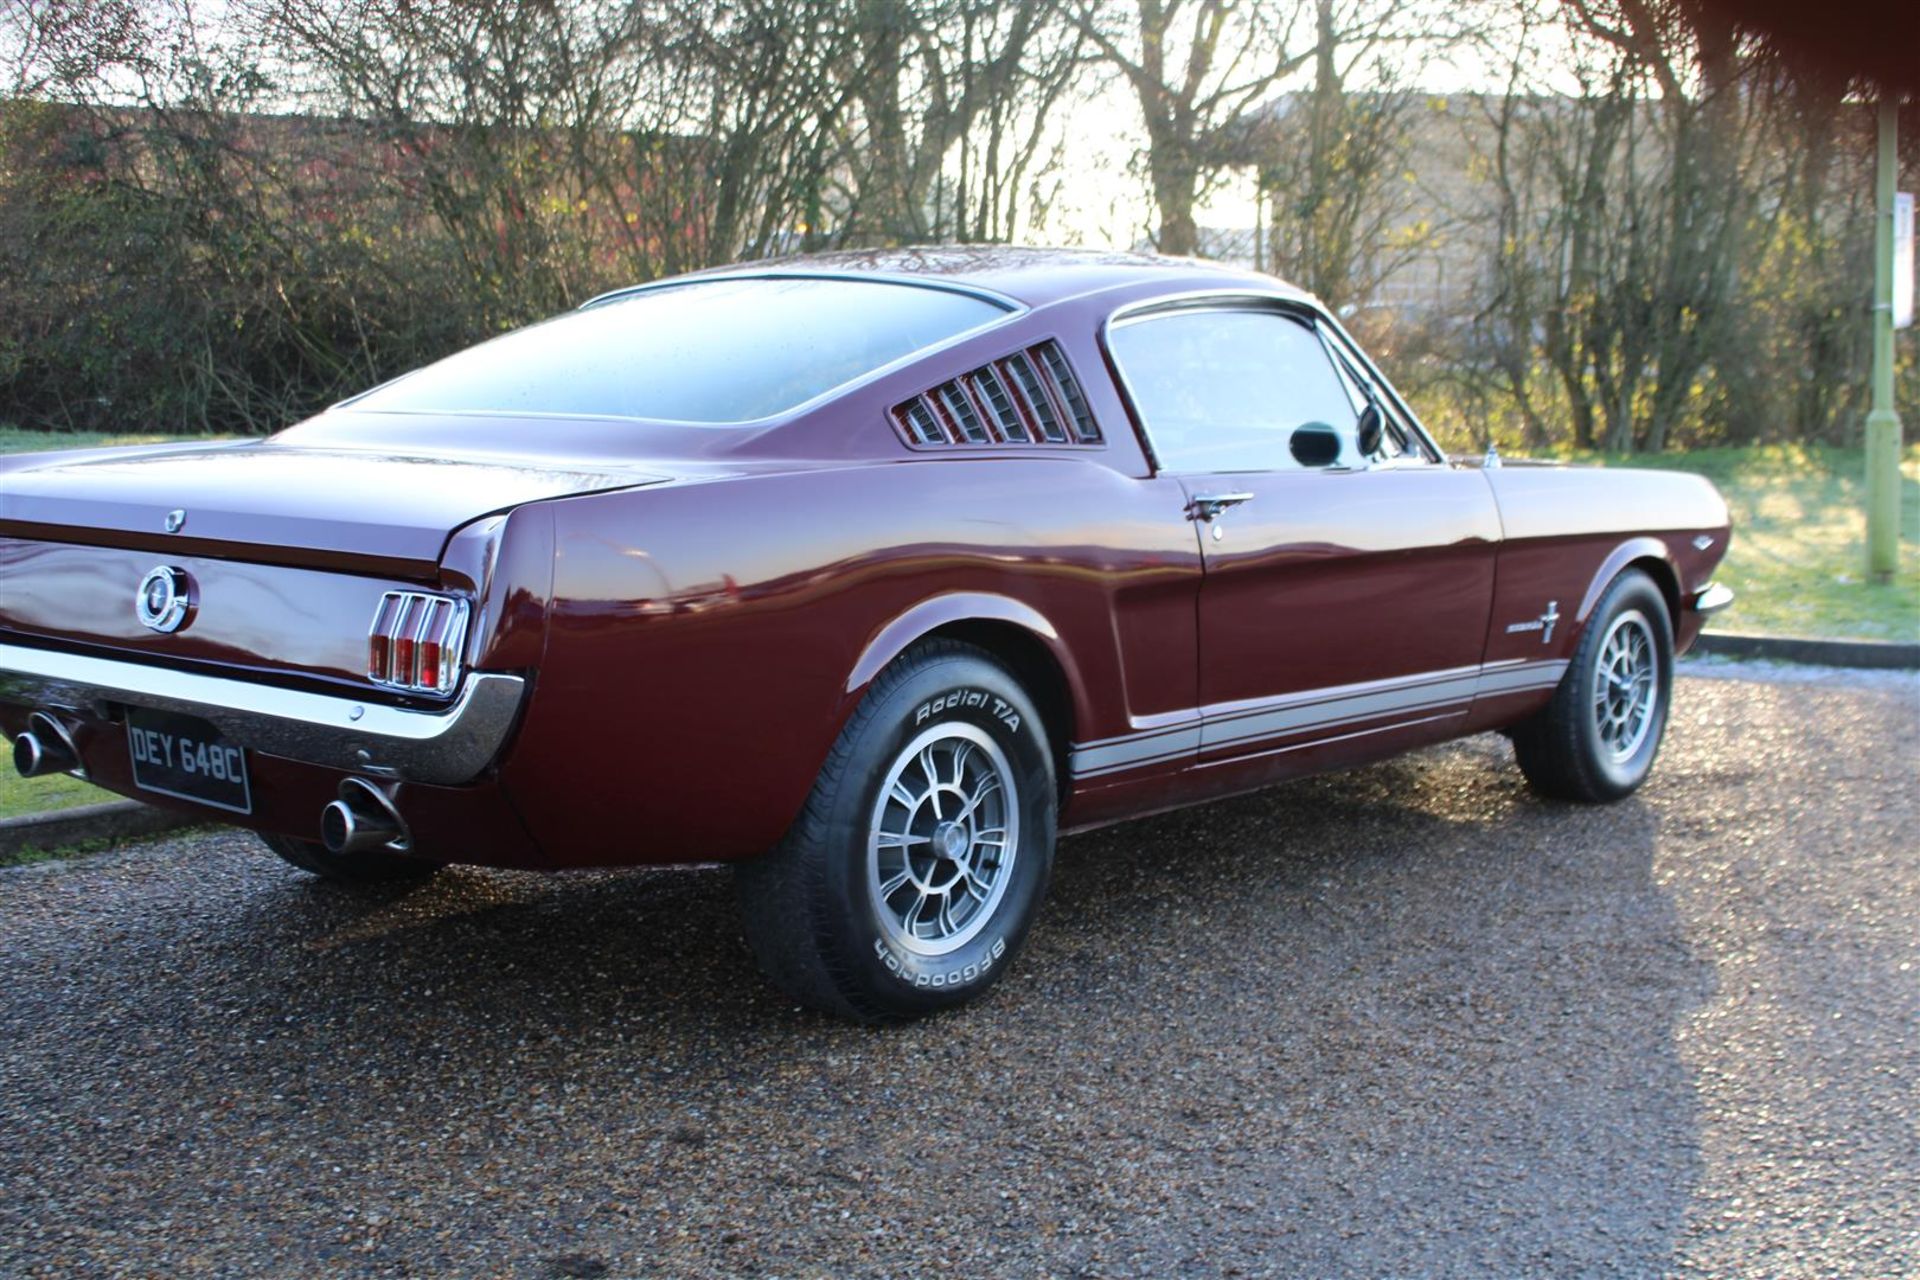 1965 Ford Mustang 5.0 V8 Fastback Auto LHD - Image 10 of 21